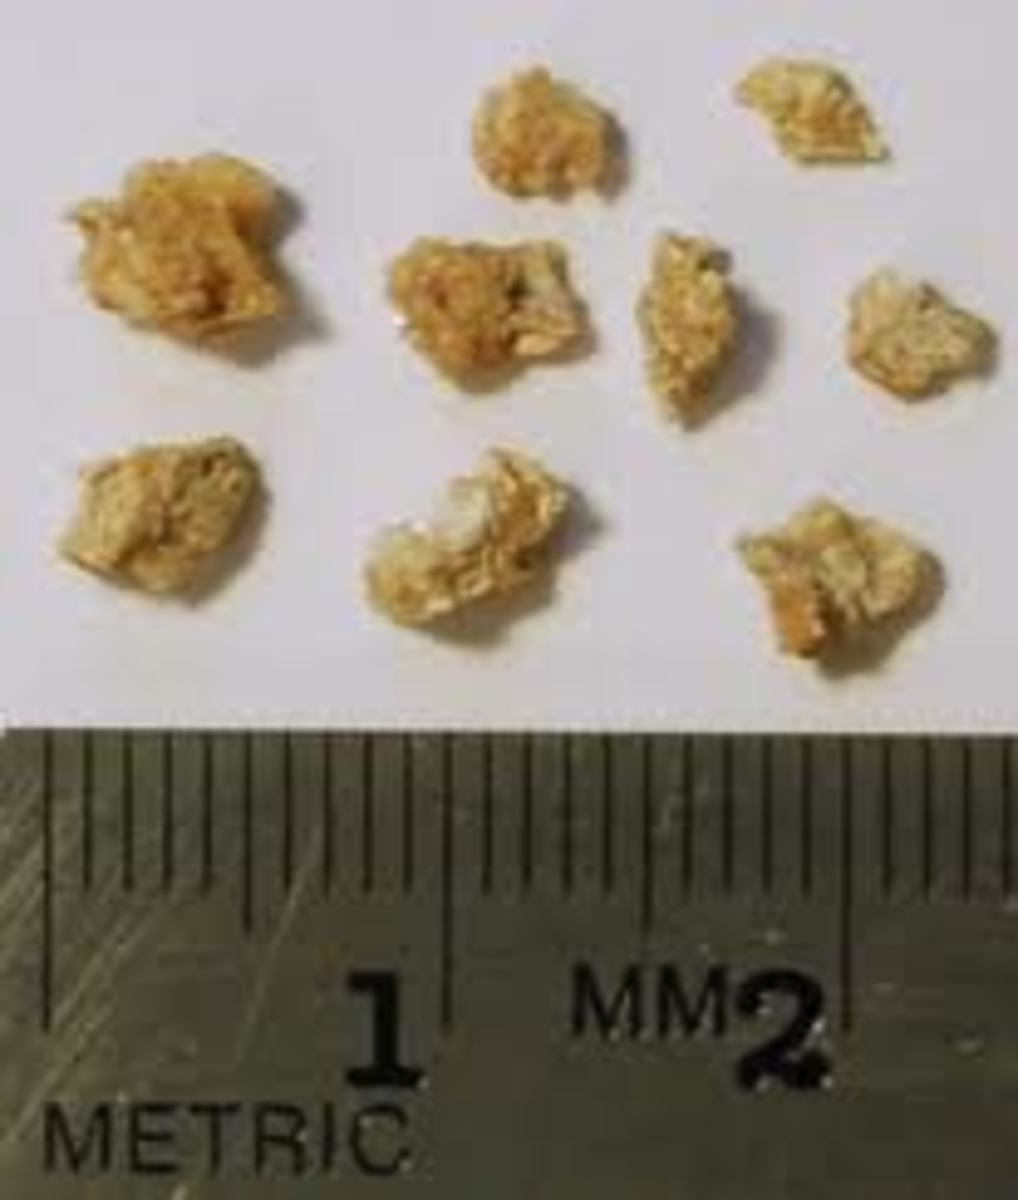 Kidney stones can range in various sizes and shapes and also colors.